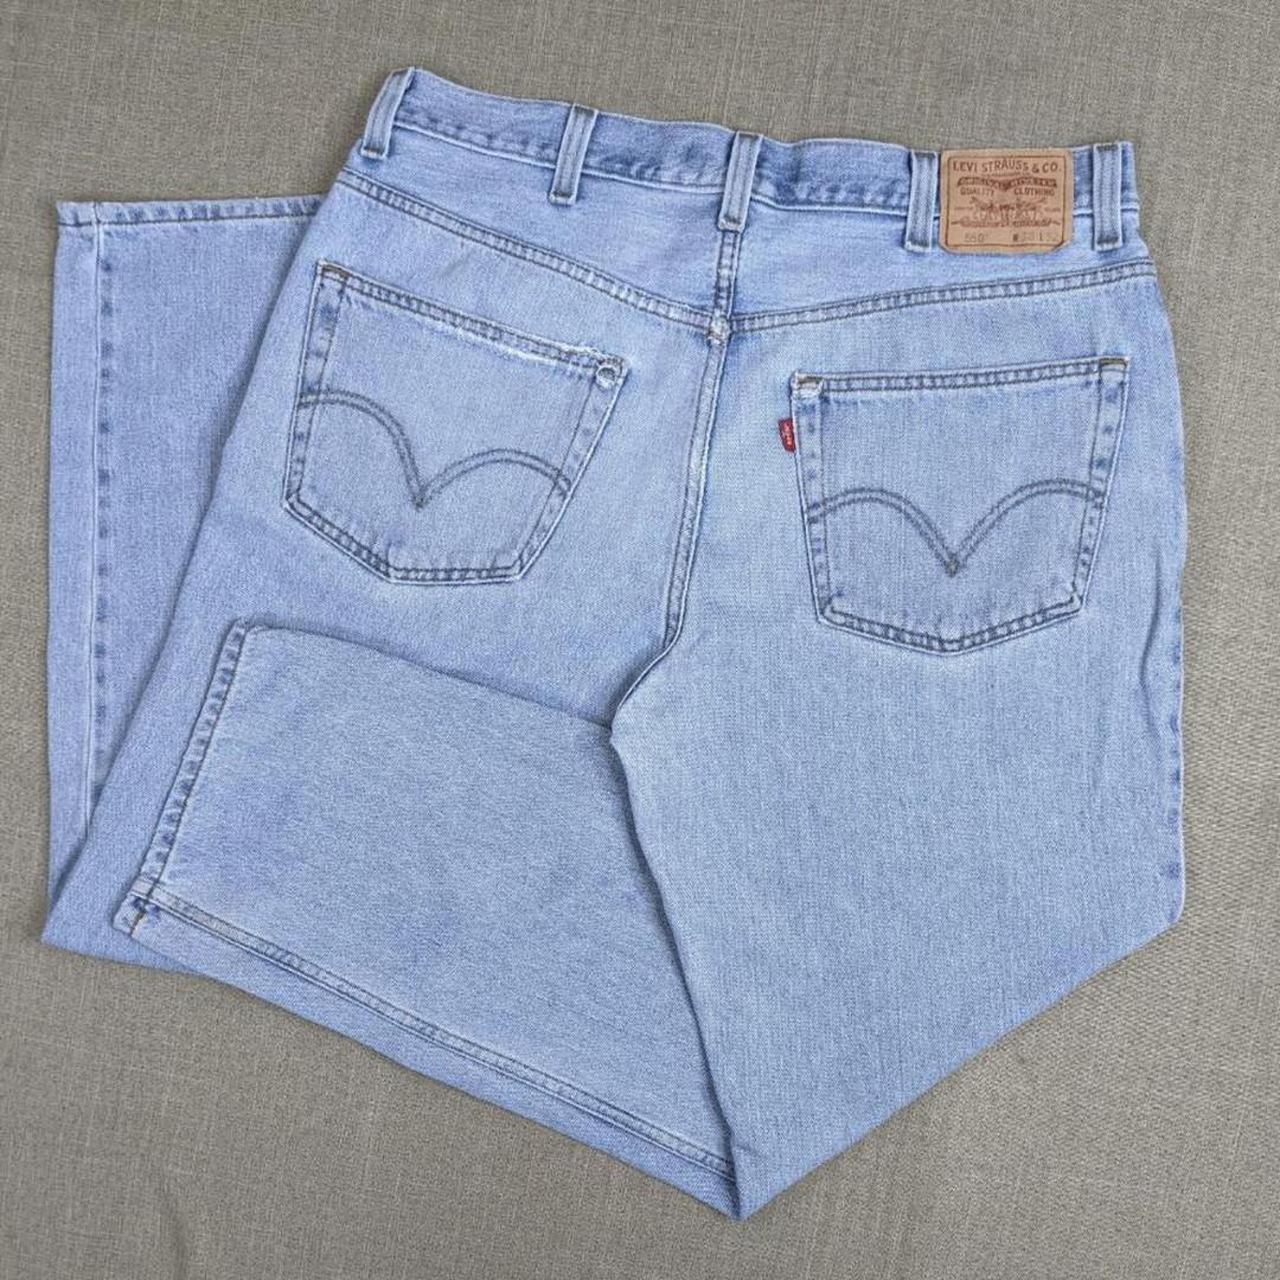 Product Image 1 - Vintage Levi's 550 jeans in